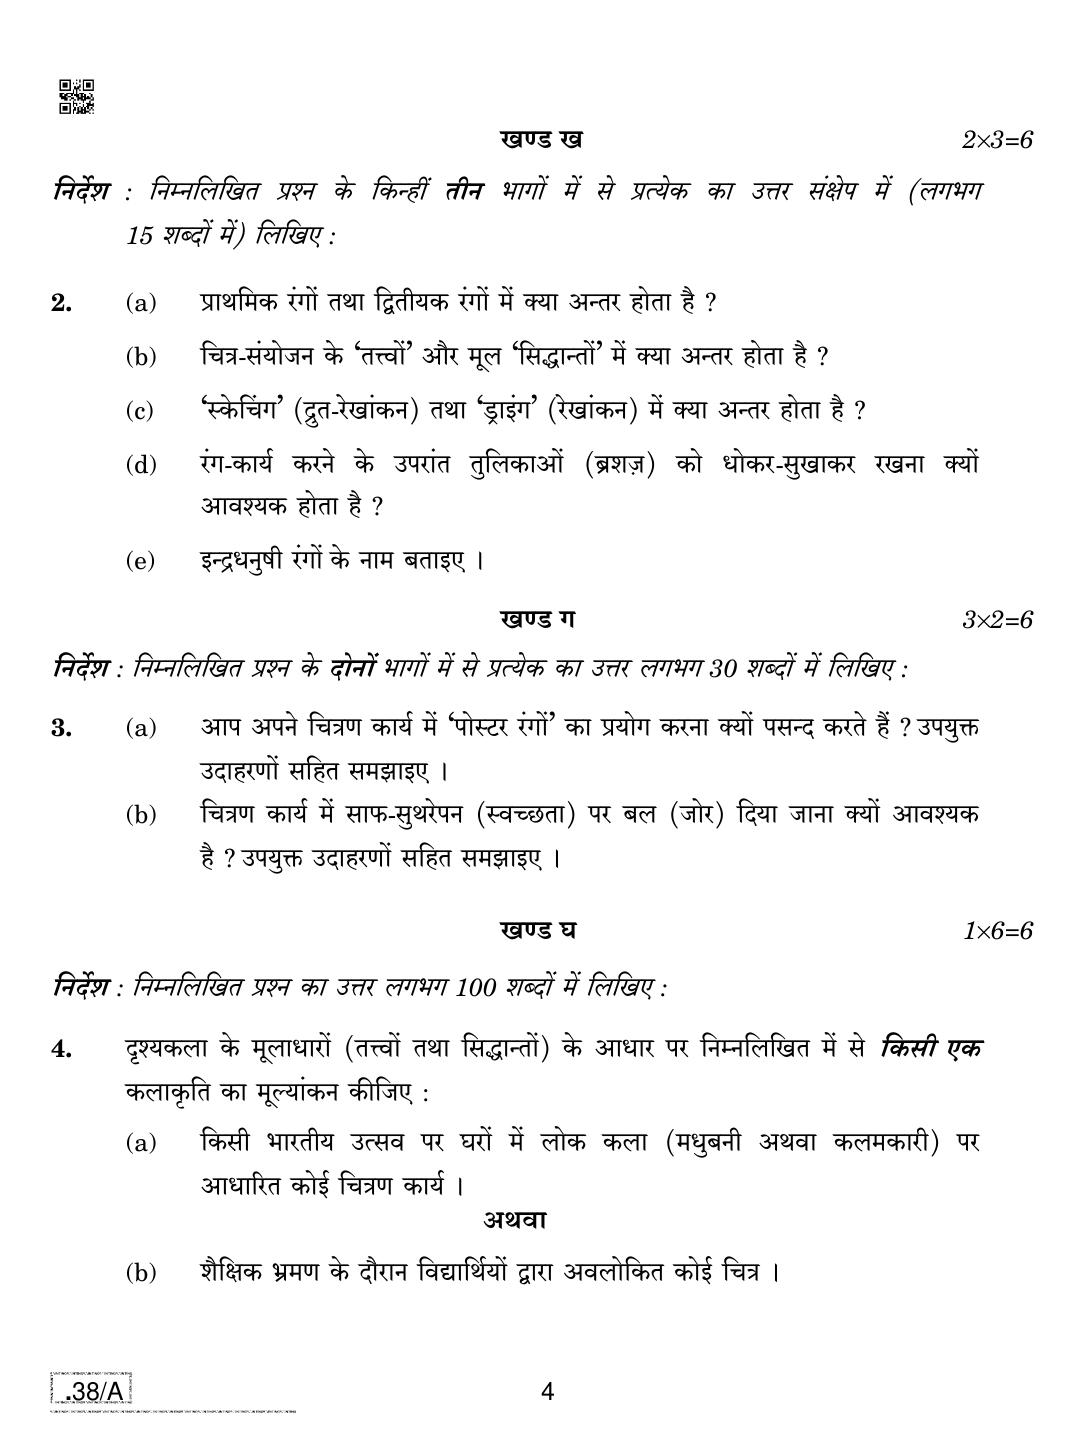 CBSE Class 10 Painting 2020 Compartment Question Paper - Page 4